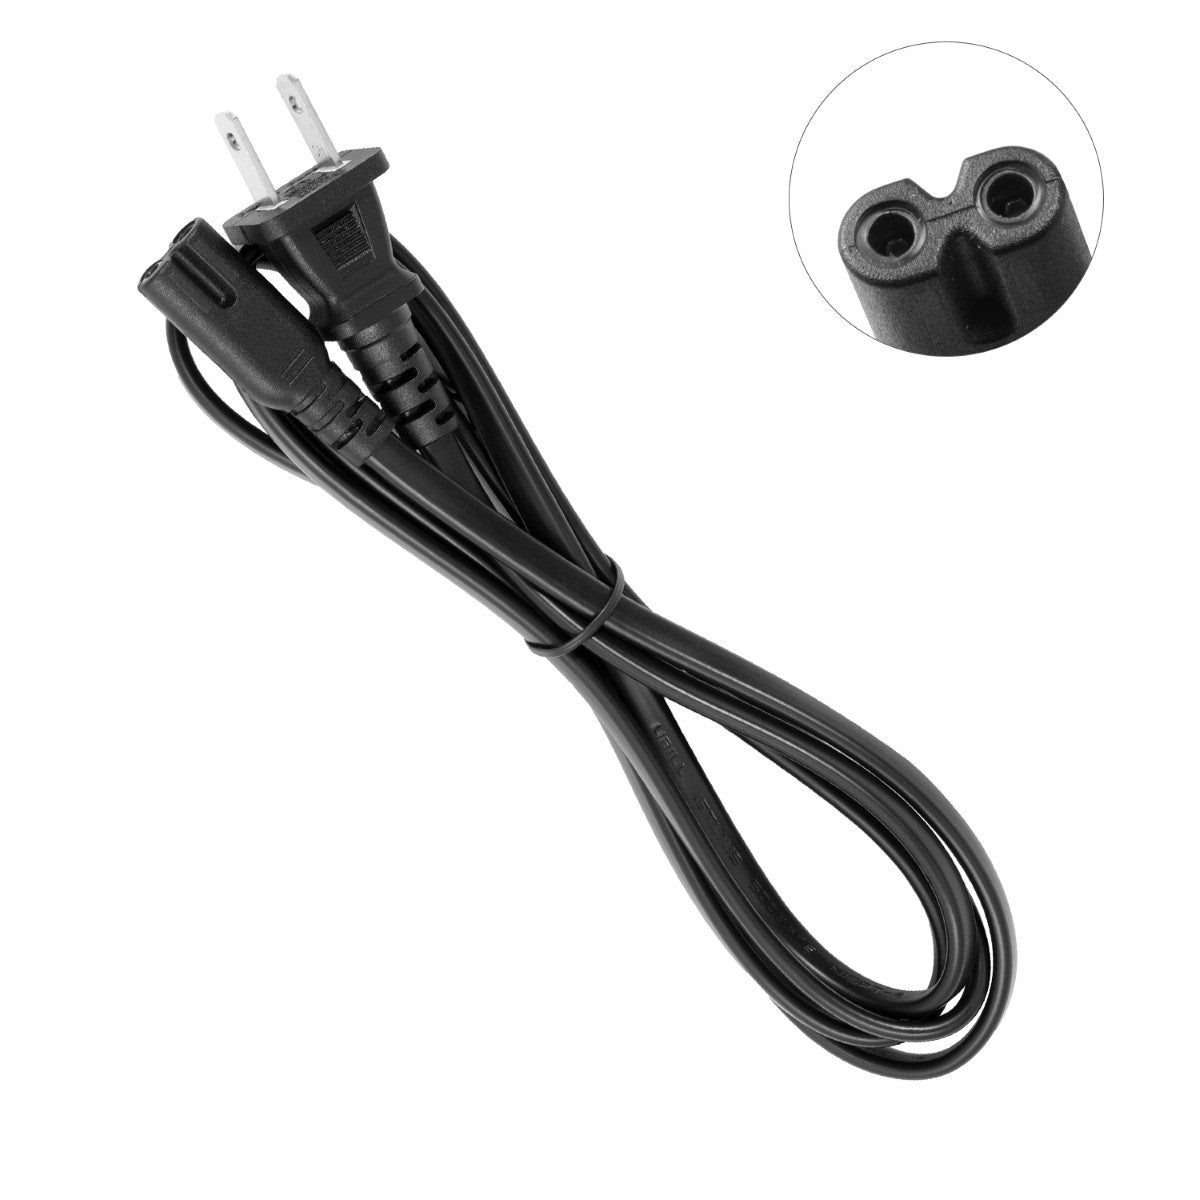 Power Cord for HP ENVY 5532 e-All-in-One Printer.